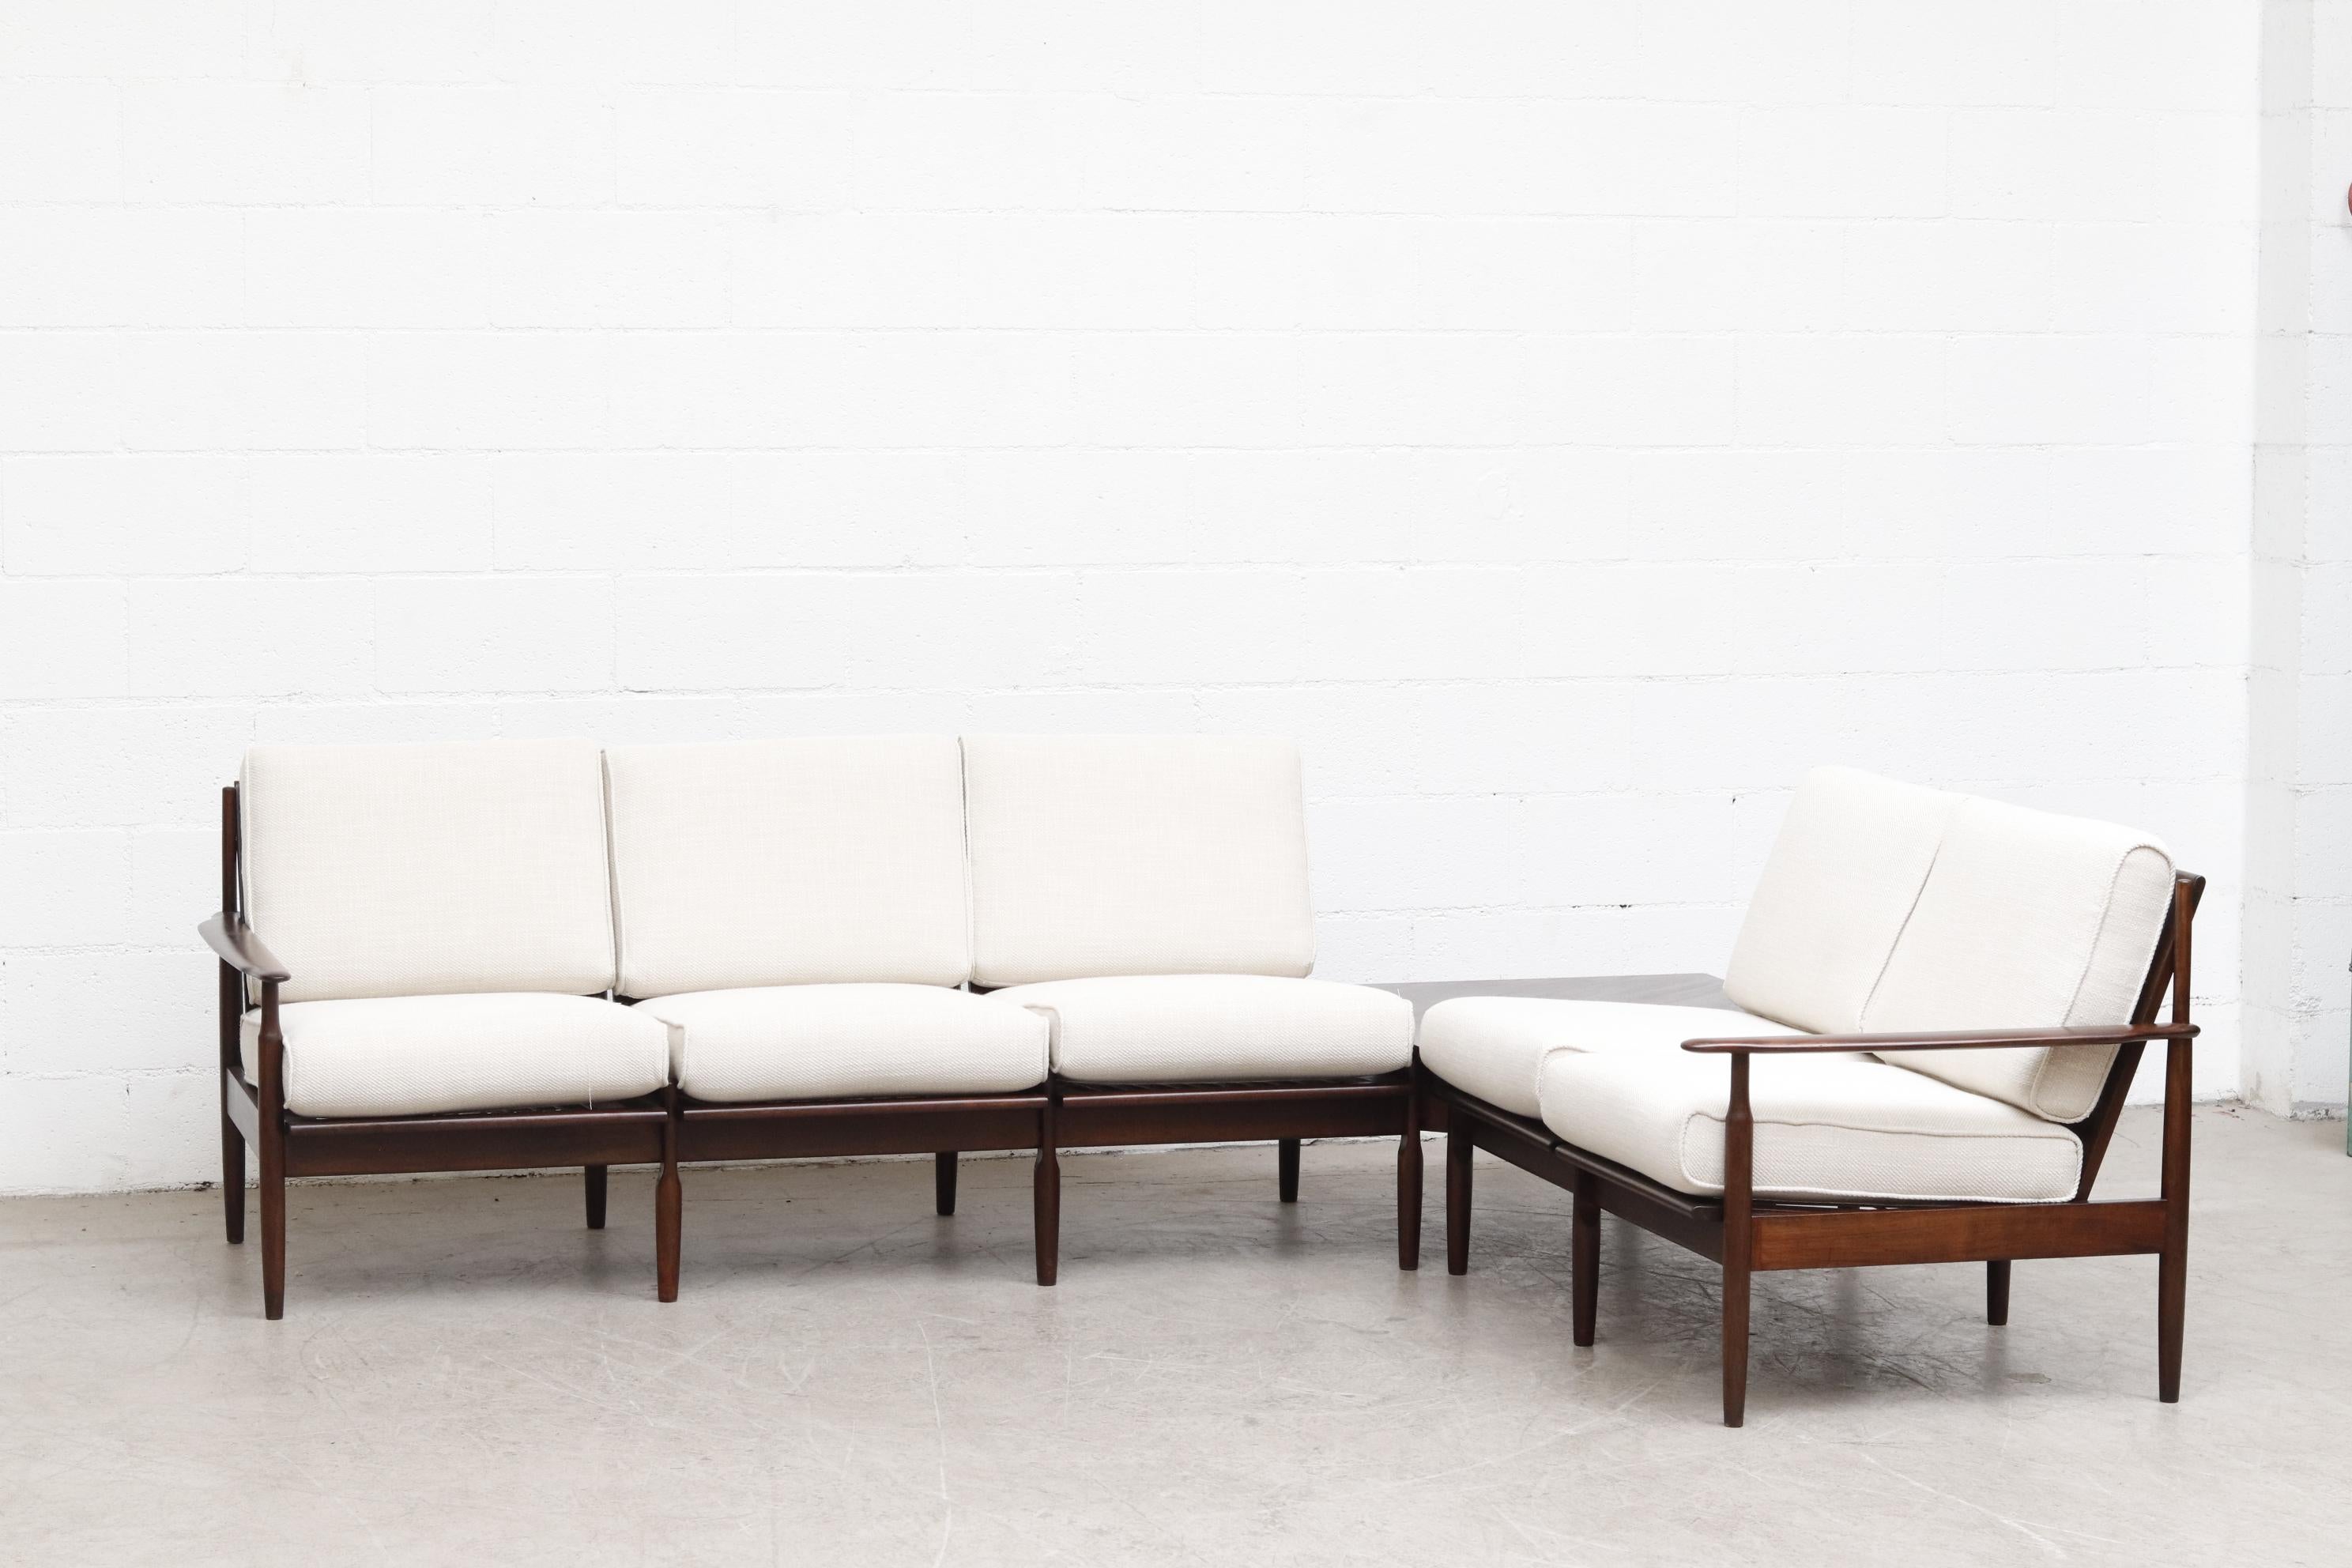 Kristian Vedel style sectional sofa set with incorporated side table. The table screws securely to the two sofa pieces. Ships in pieces. Three-seat is 71.5 W x 31.5 D, two-seat is 49.5 W x 31.5 D, table is 31.5 x 31.5 and disassembles into 3 pieces.